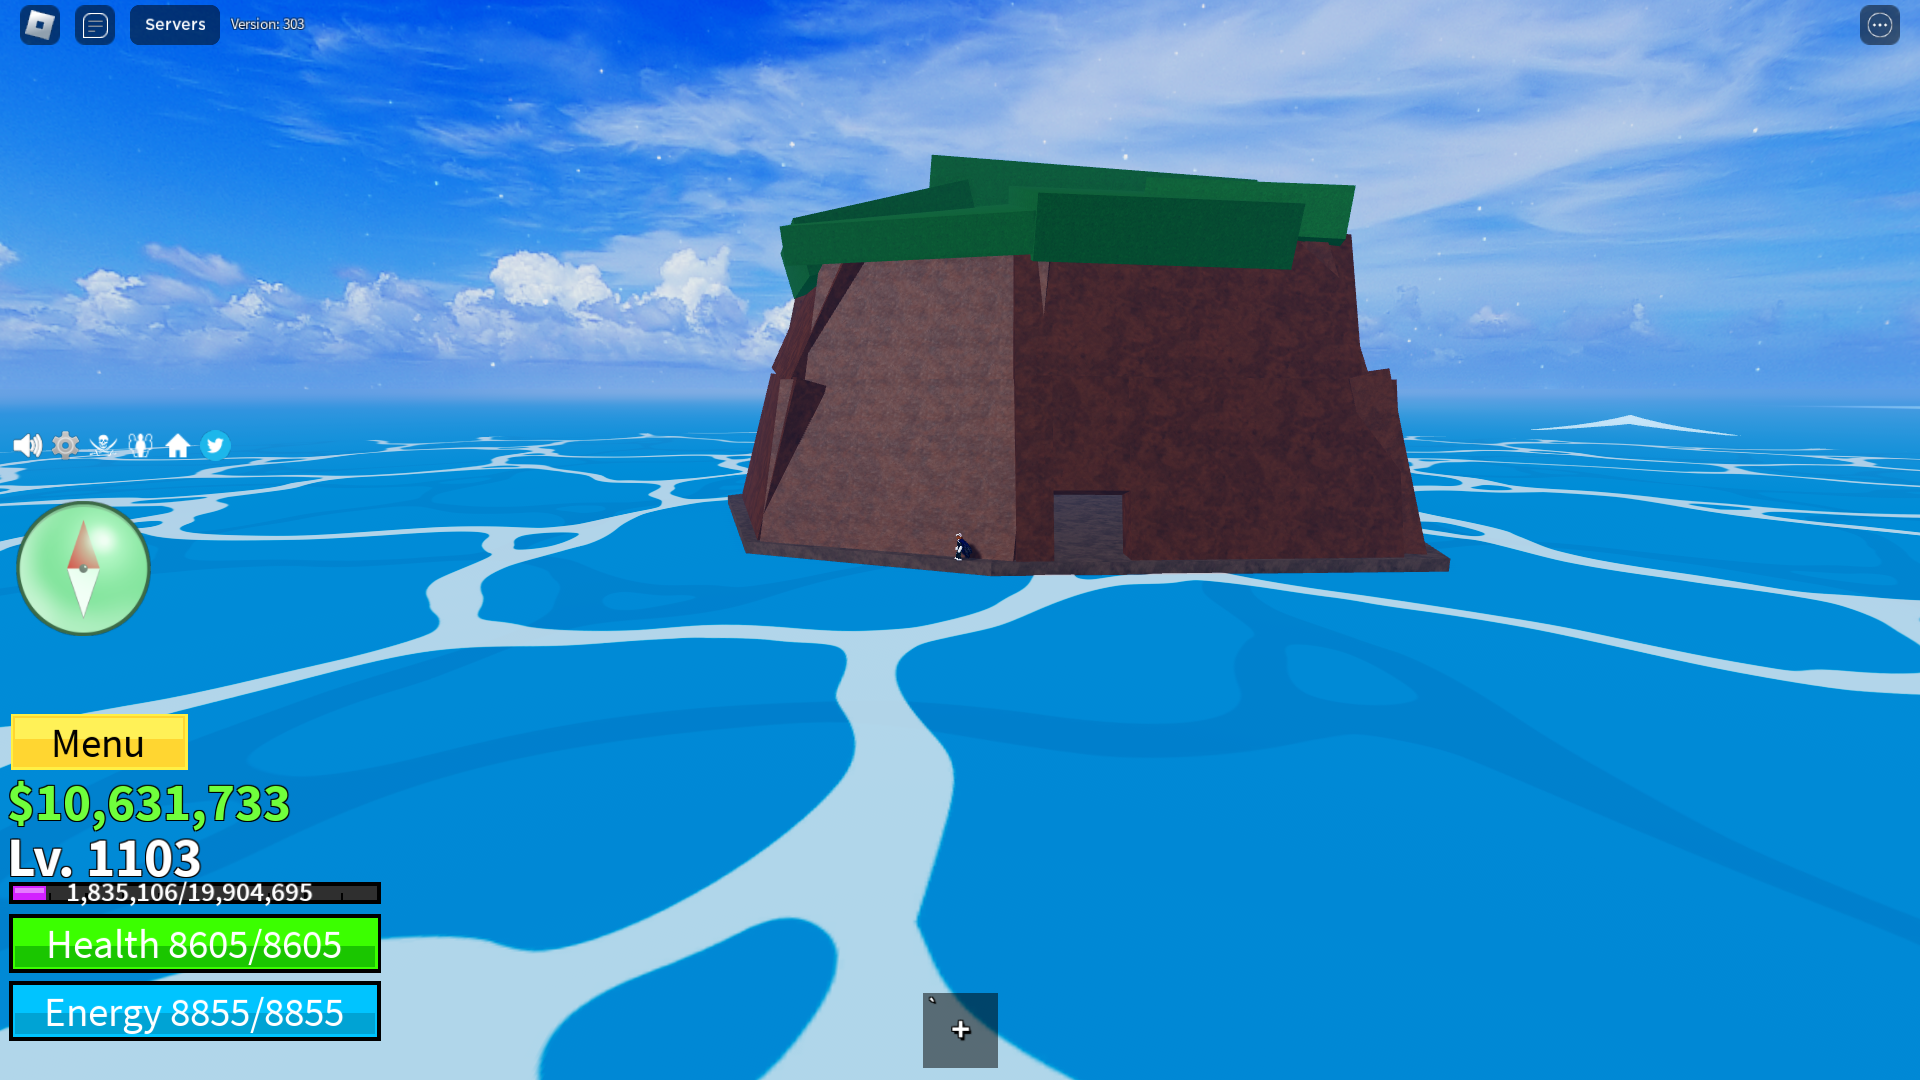 All fruit spawn locations in blox fruits second sea - Top vector